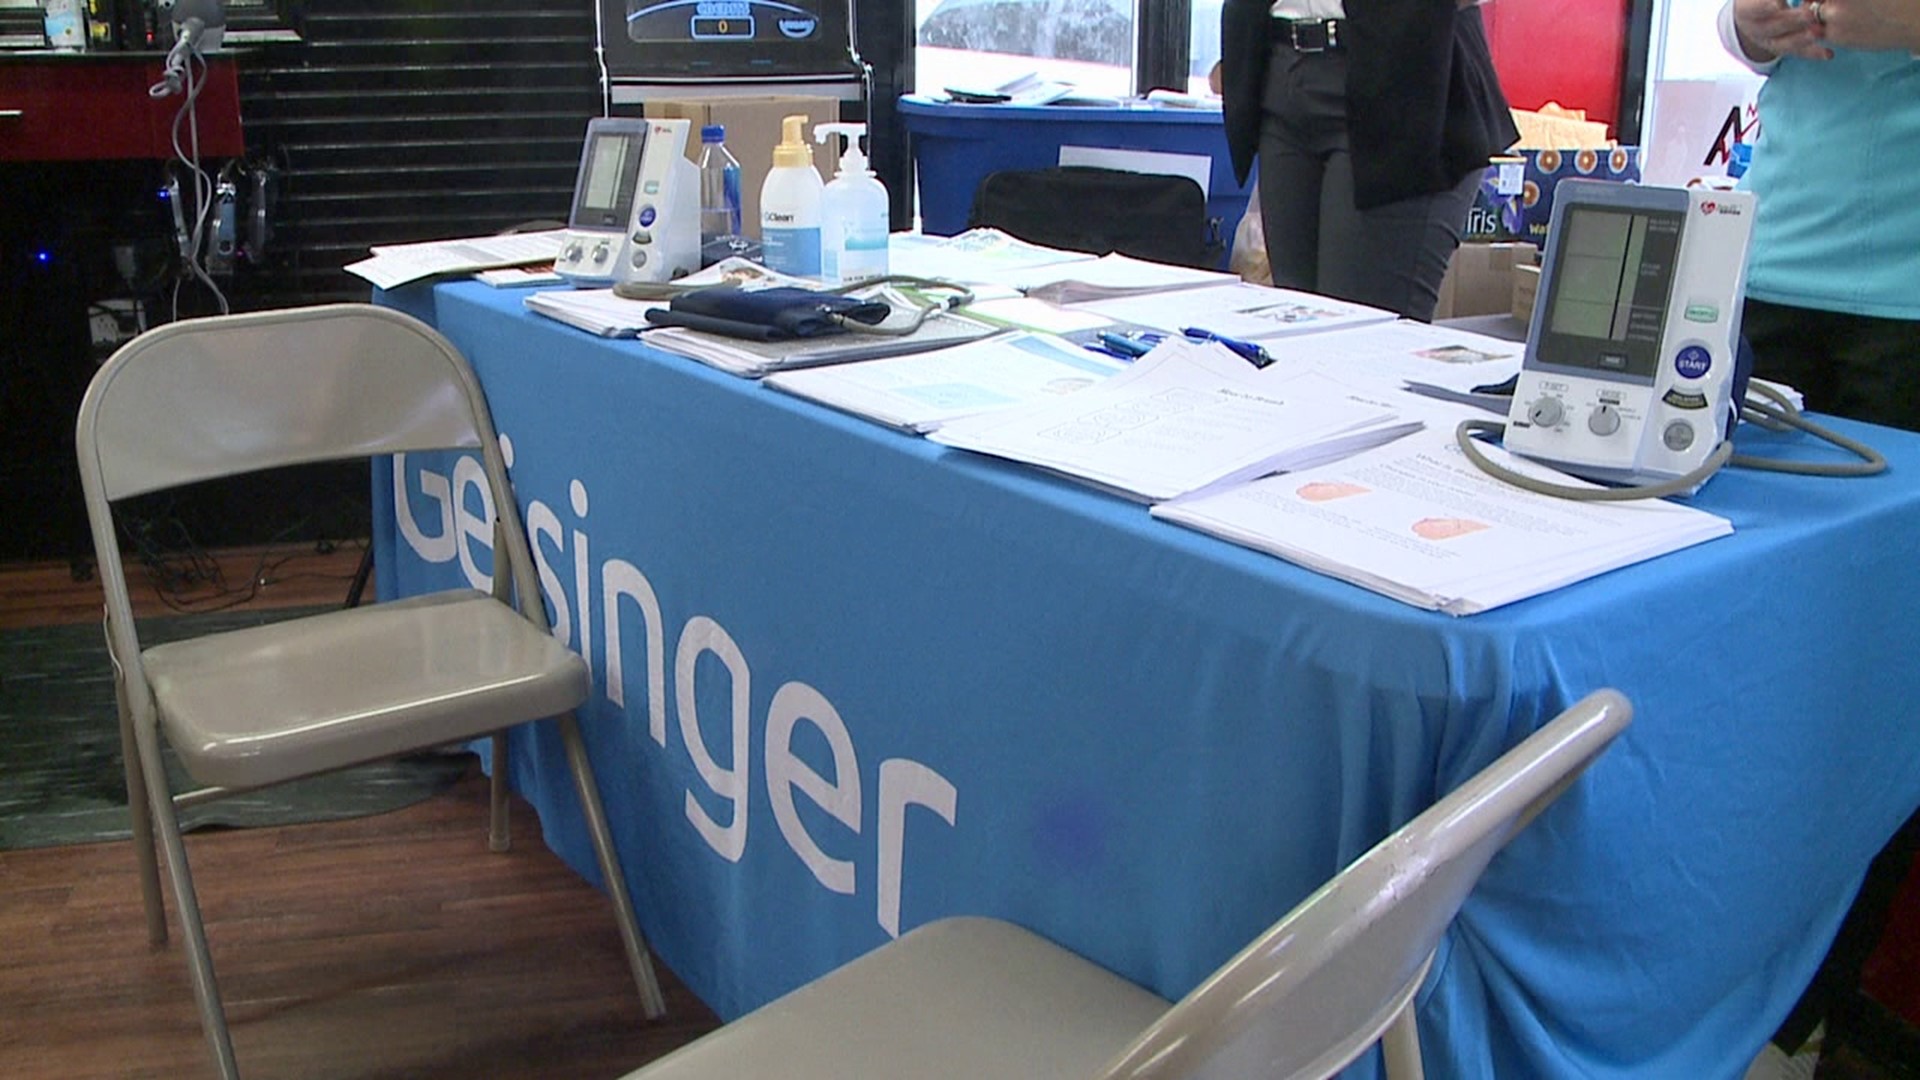 Geisinger teamed up with Butter's Barbershop in Scranton to host a health screening event Friday afternoon.